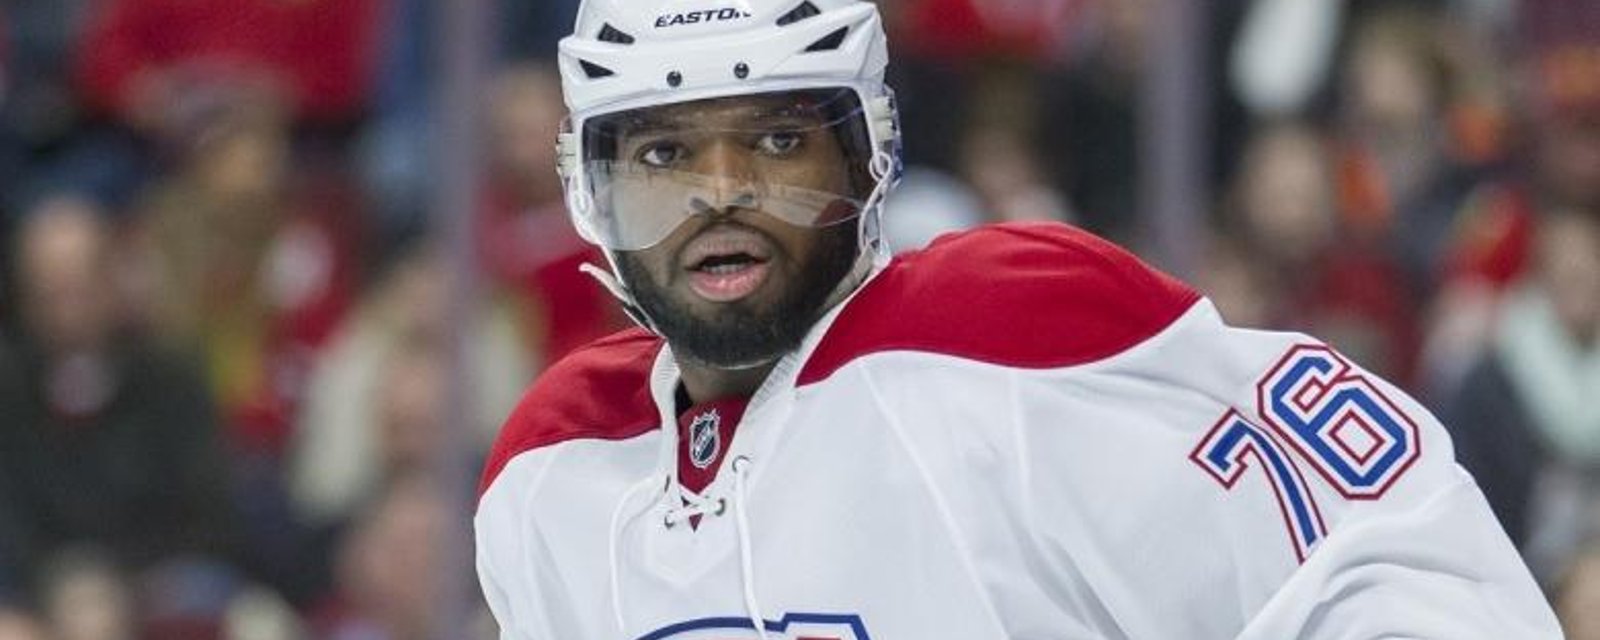 P.K Subban fires a rocket from center ice, scores, and gets a penalty!